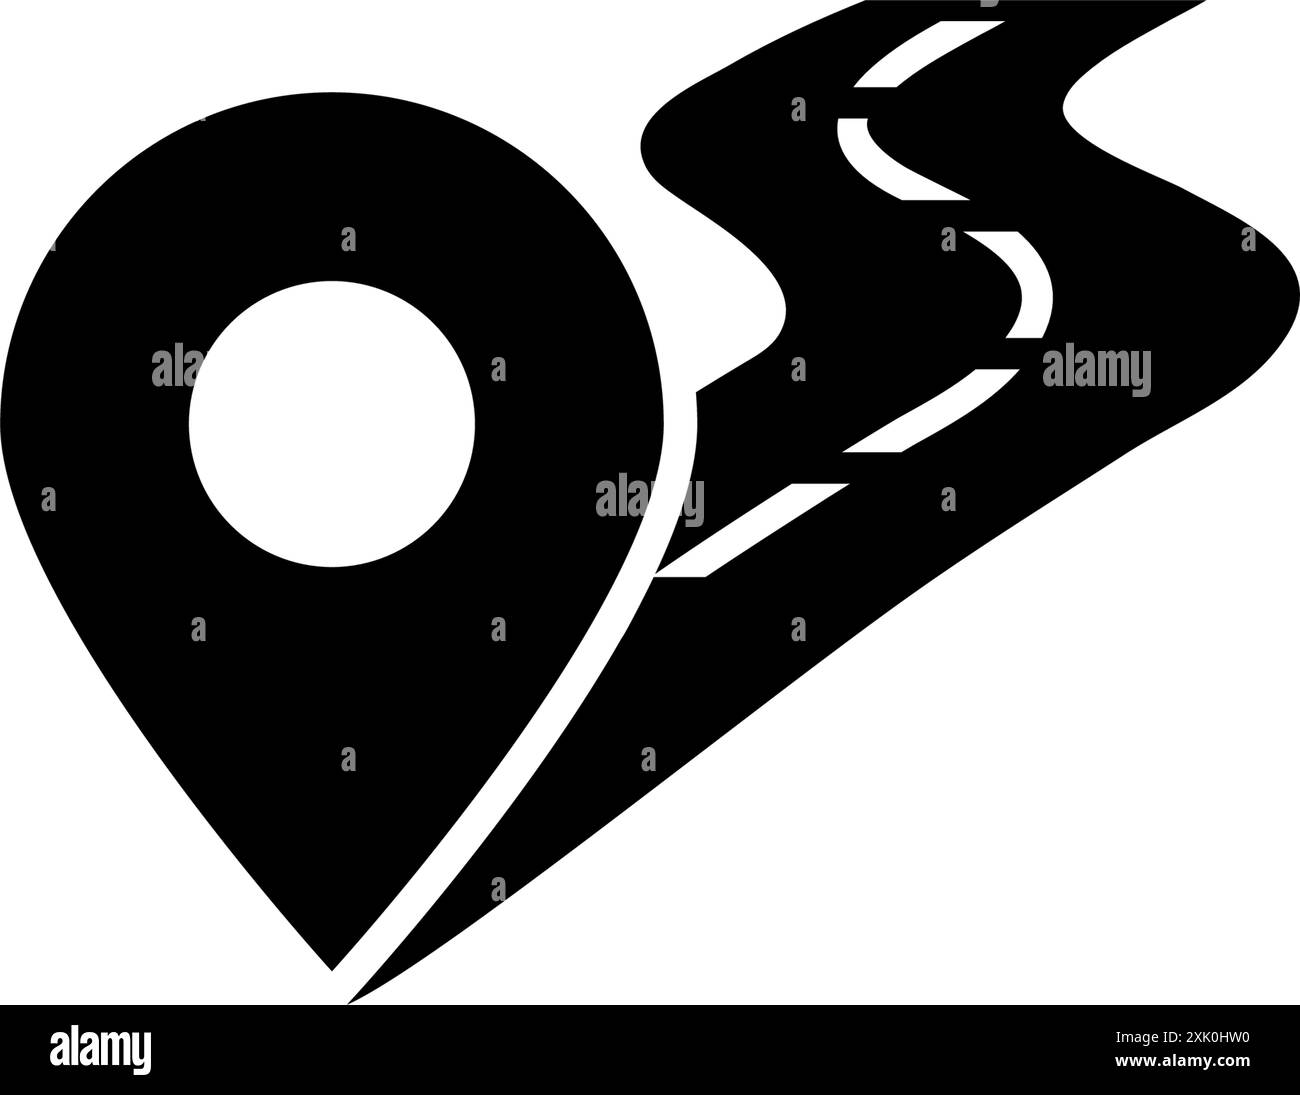 Black and white vector icon of a location pin on a road. Stock Vector